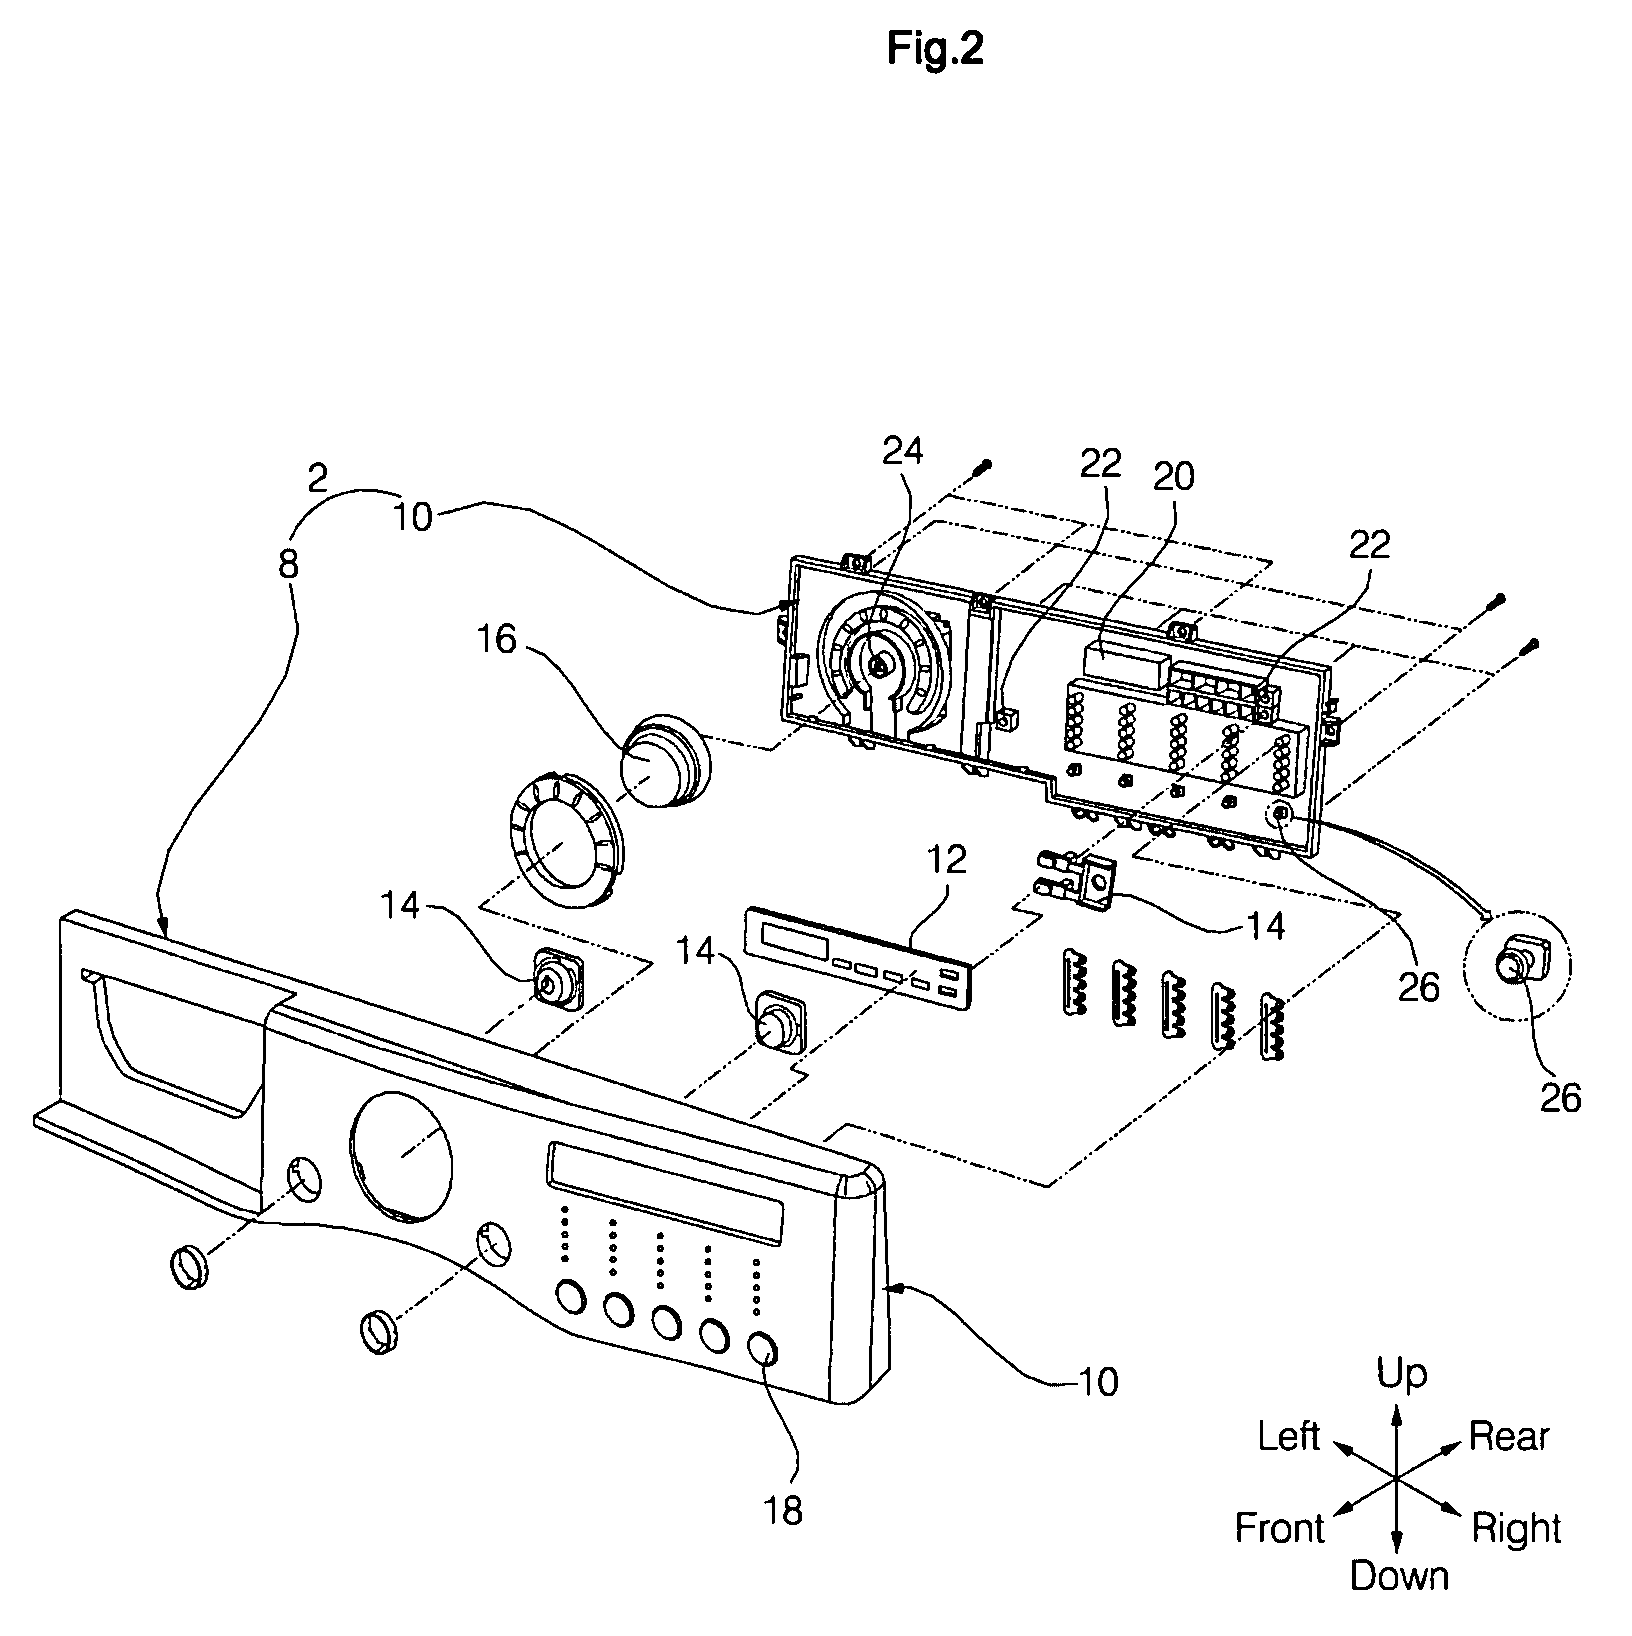 Capacitive switch of electric/electronic device